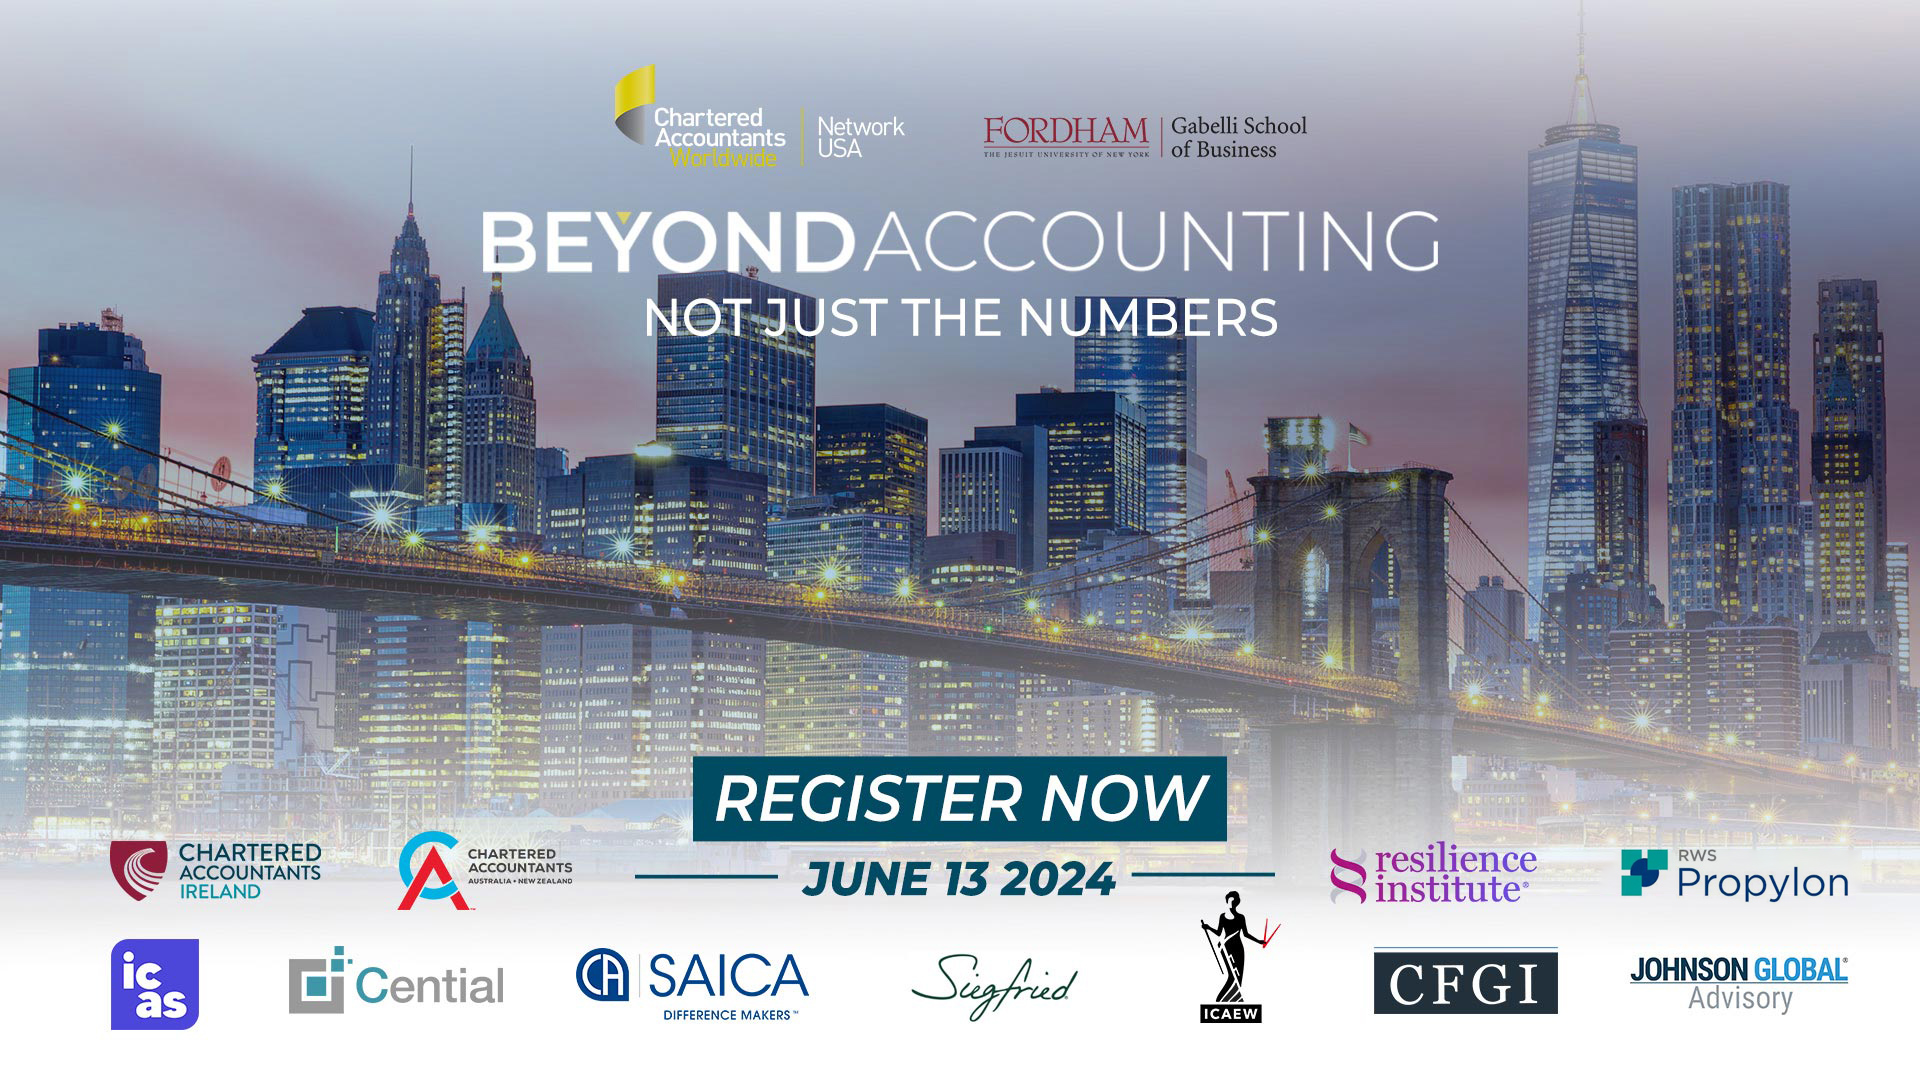 CAW Network USA Beyond Accounting - Not Just the Numbers event June 13, 2004